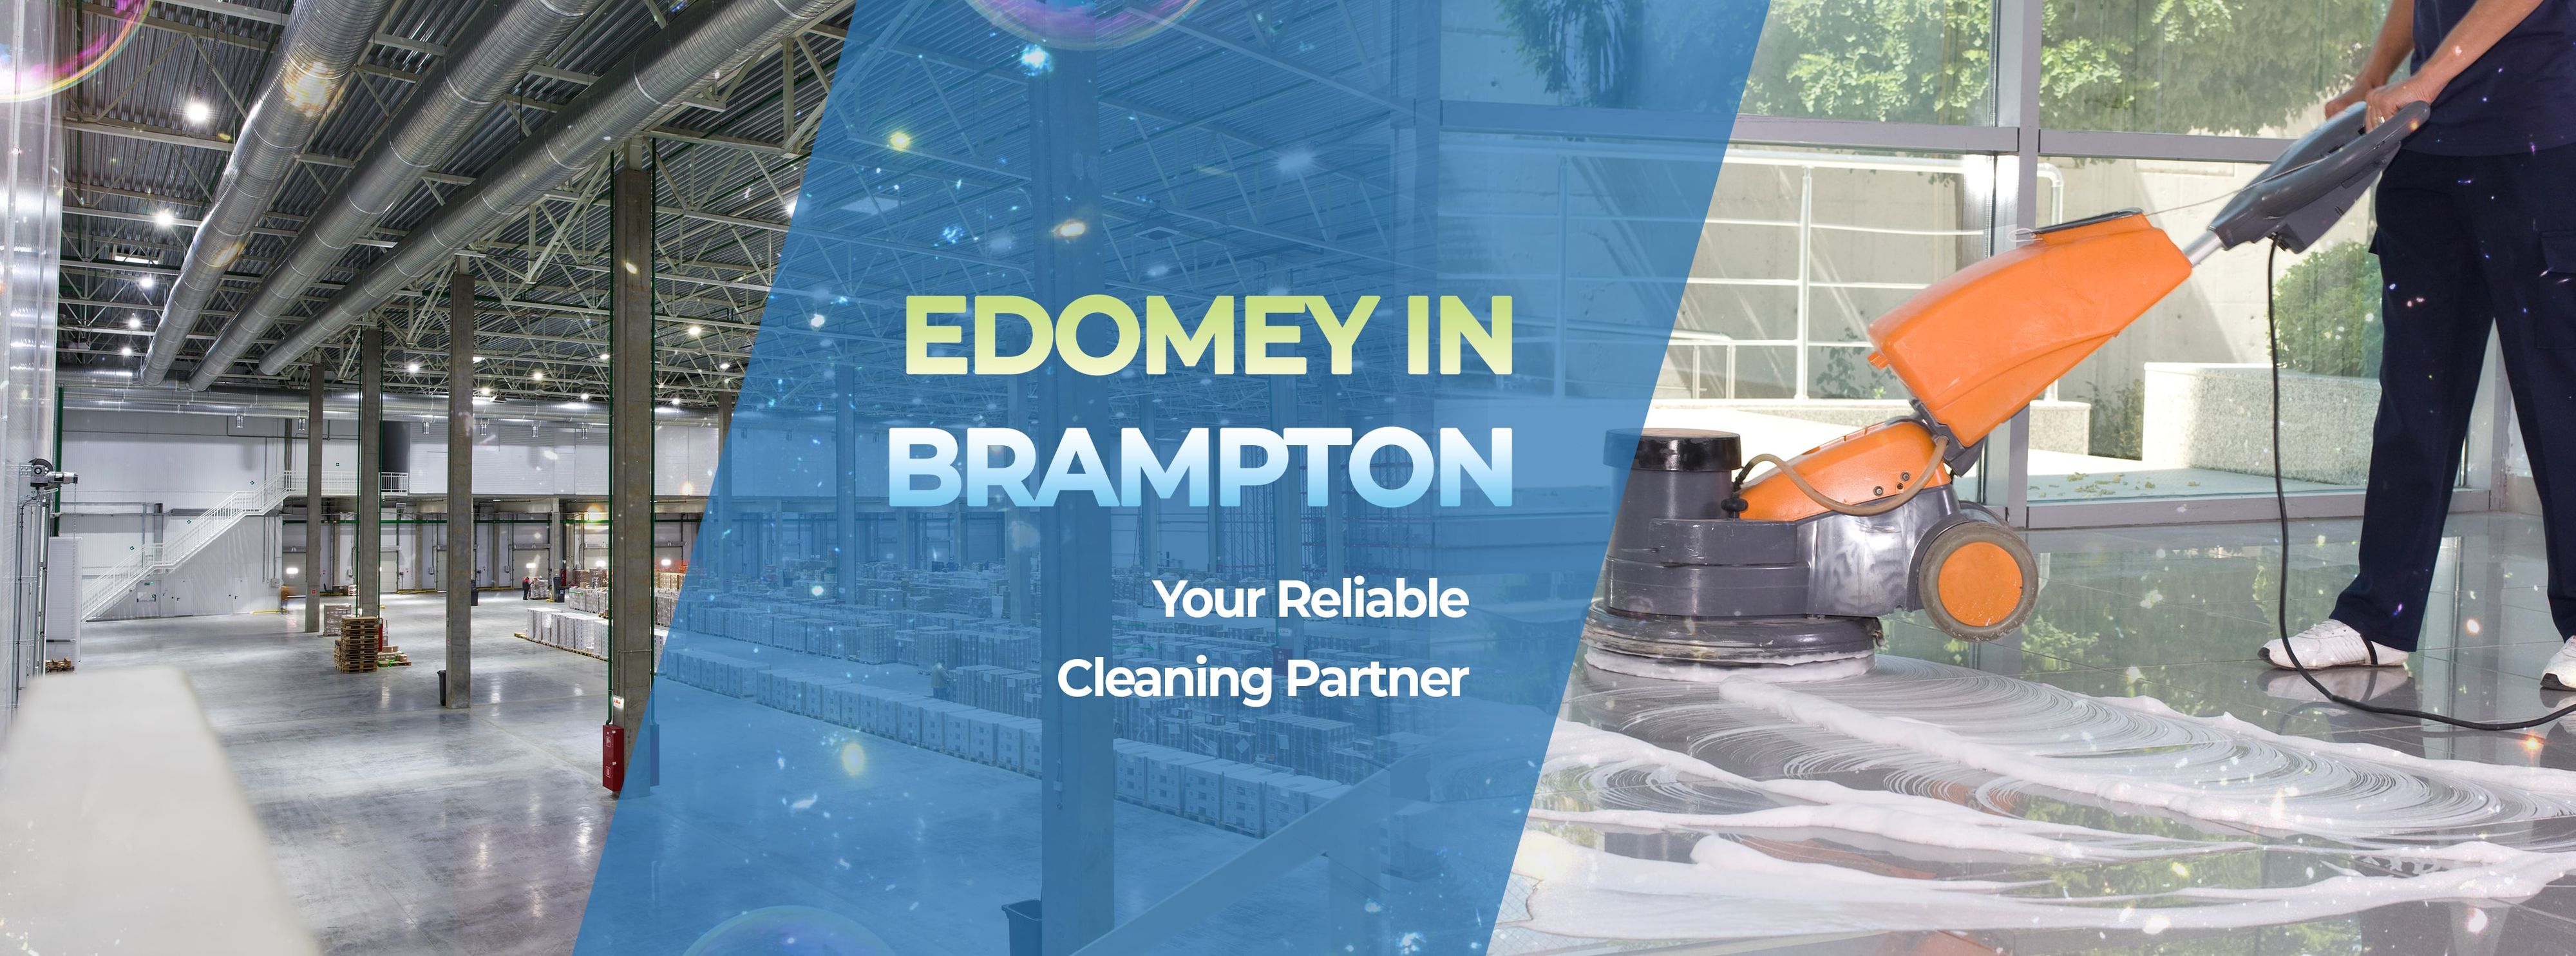 Commercial Cleaning Services in Brampton for retail stores